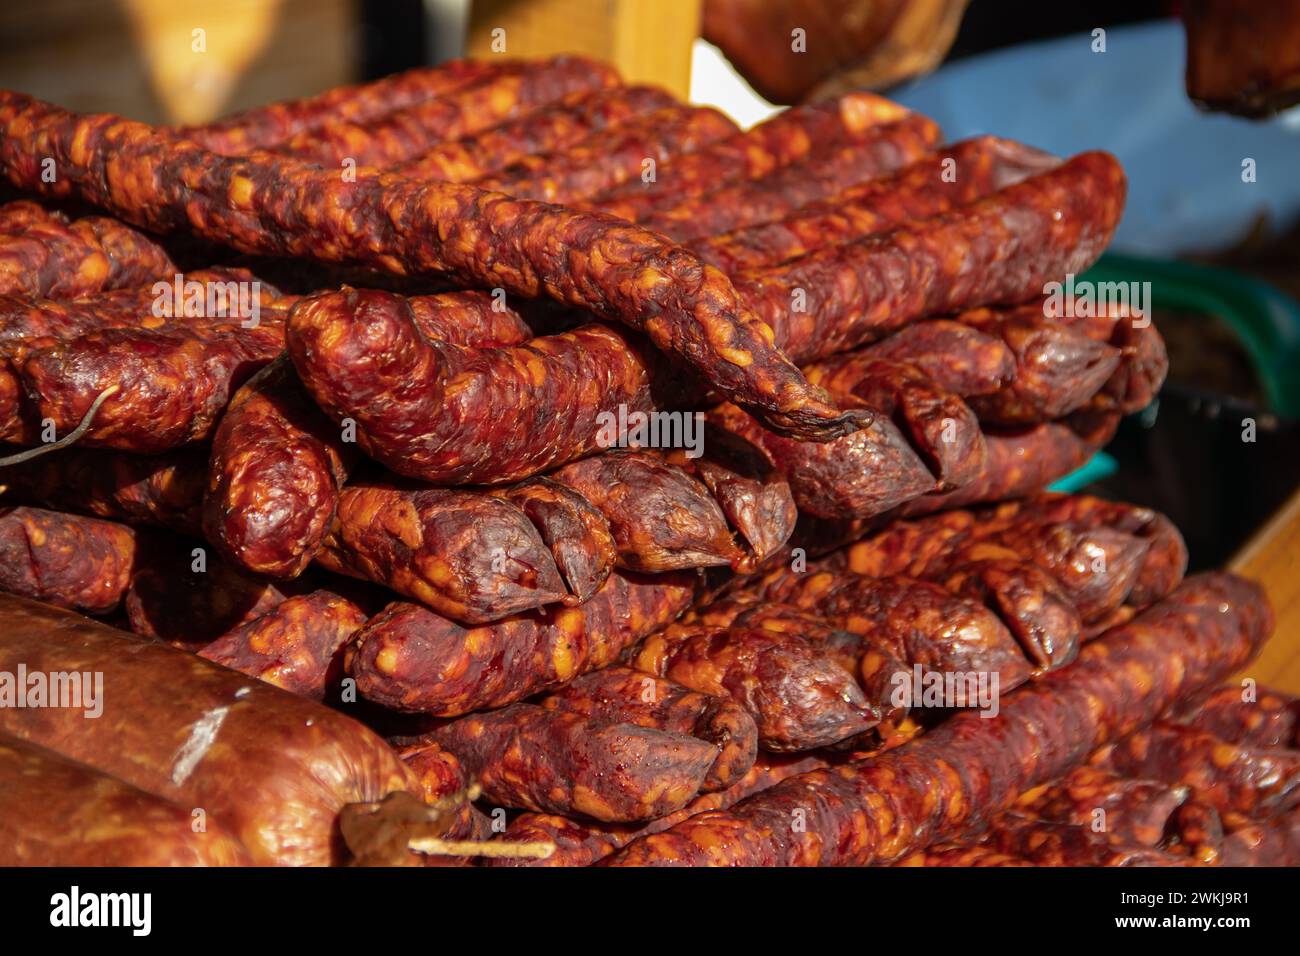 Serbian traditionally made and smoke dried sausages on a farmer's market in Kacarevo village, gastro bacon and dry meat products festival held yearly Stock Photo